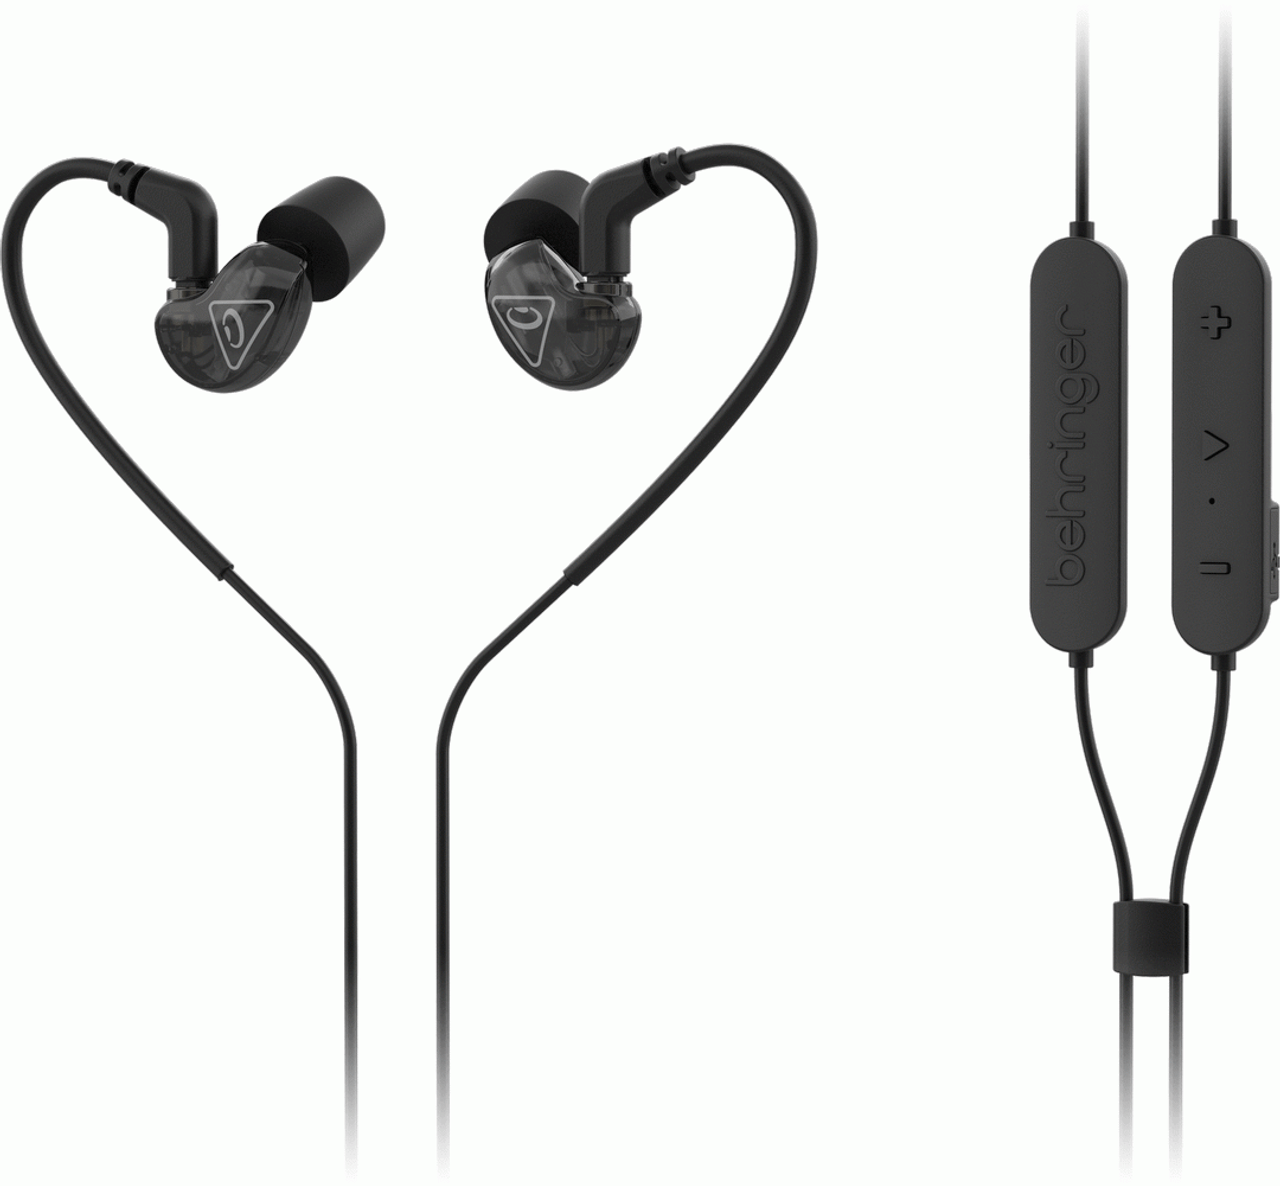 The Behringer SD251BT Monitoring Earphones With Bluetooth